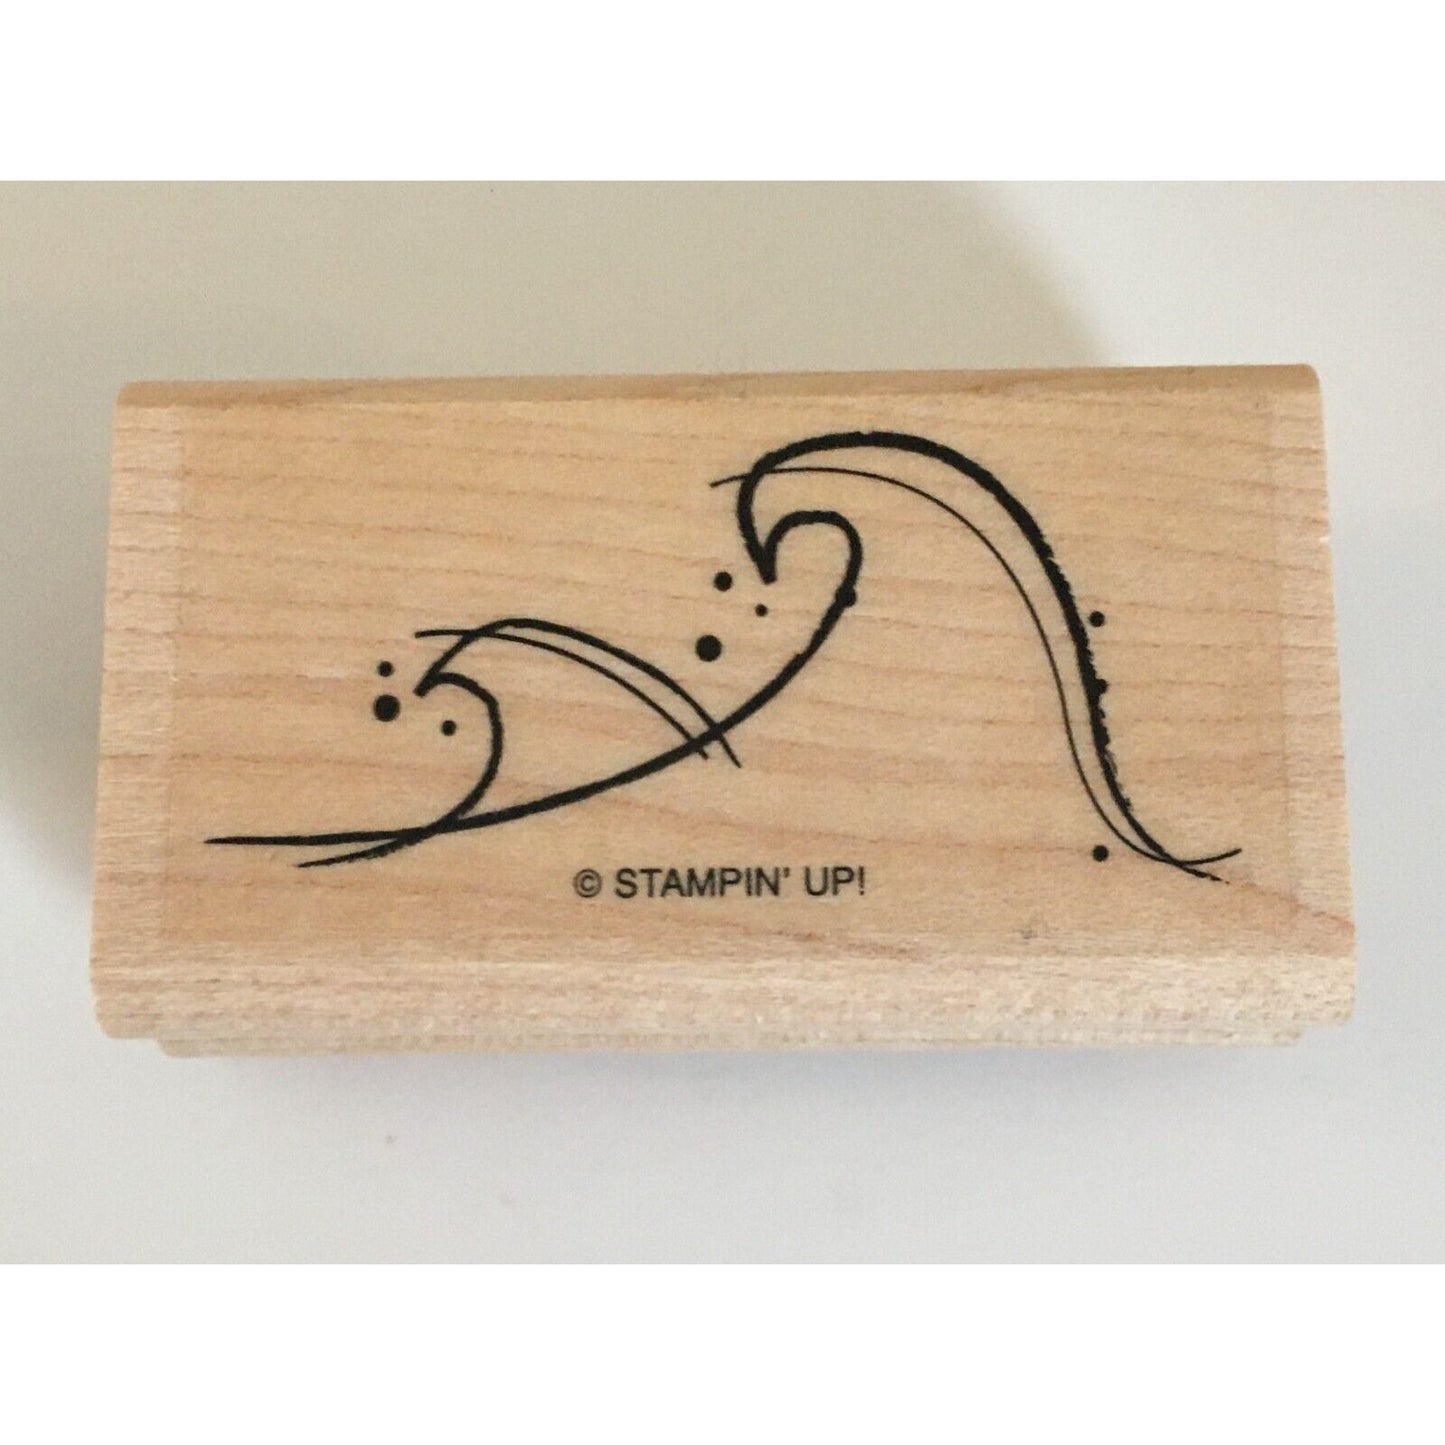 Stampin Up Rubber Stamp Just Surfing Wave Surfboard Ocean Beach Rare Retired